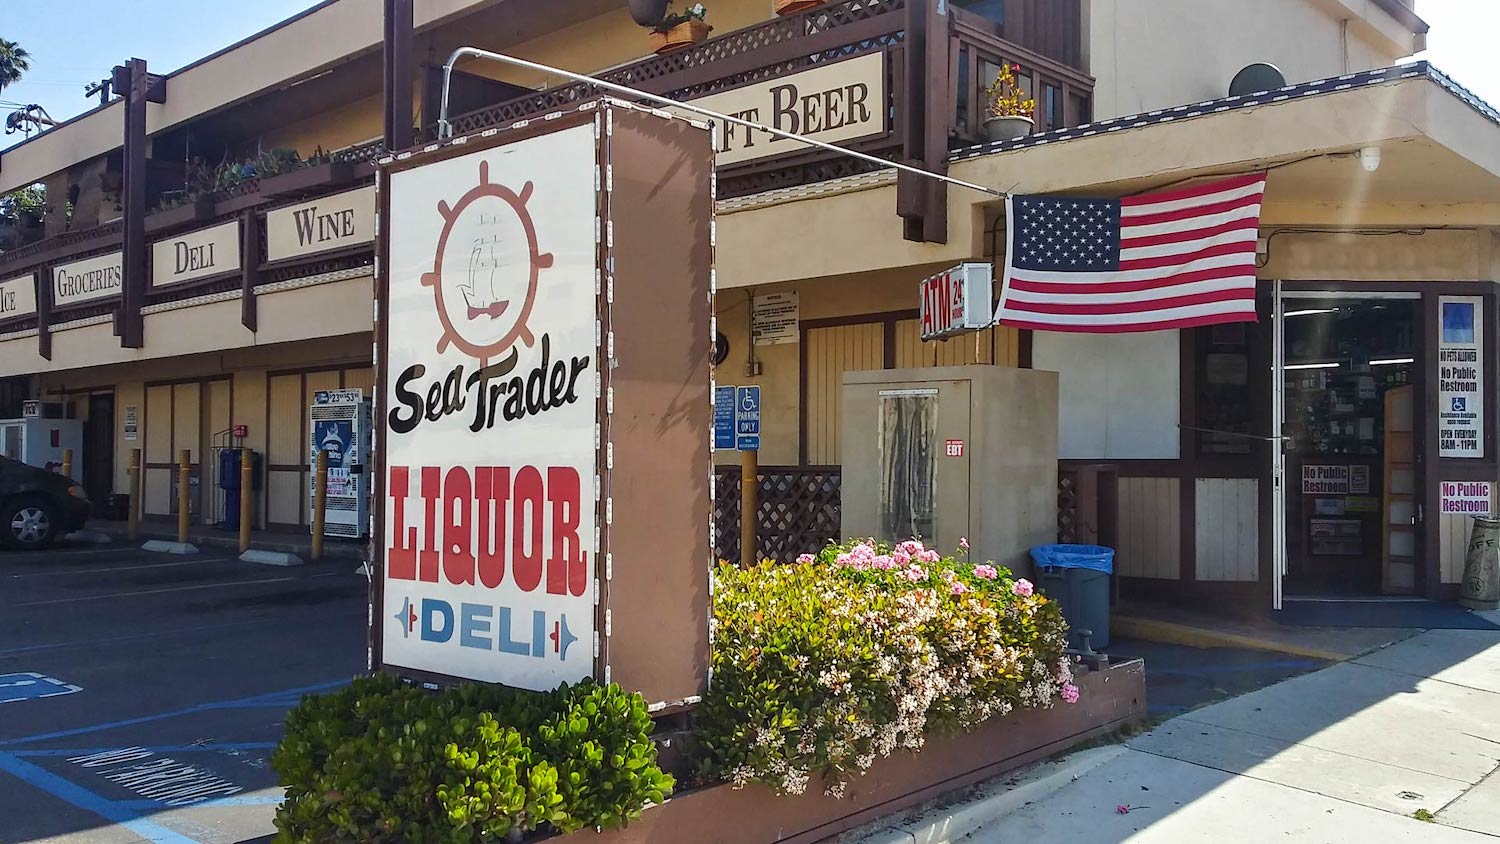 Best liquor store sandwiches in San Diego featuring the Nuclear sandwich from Sea Trader Liquor & Deli in Ocean Beach